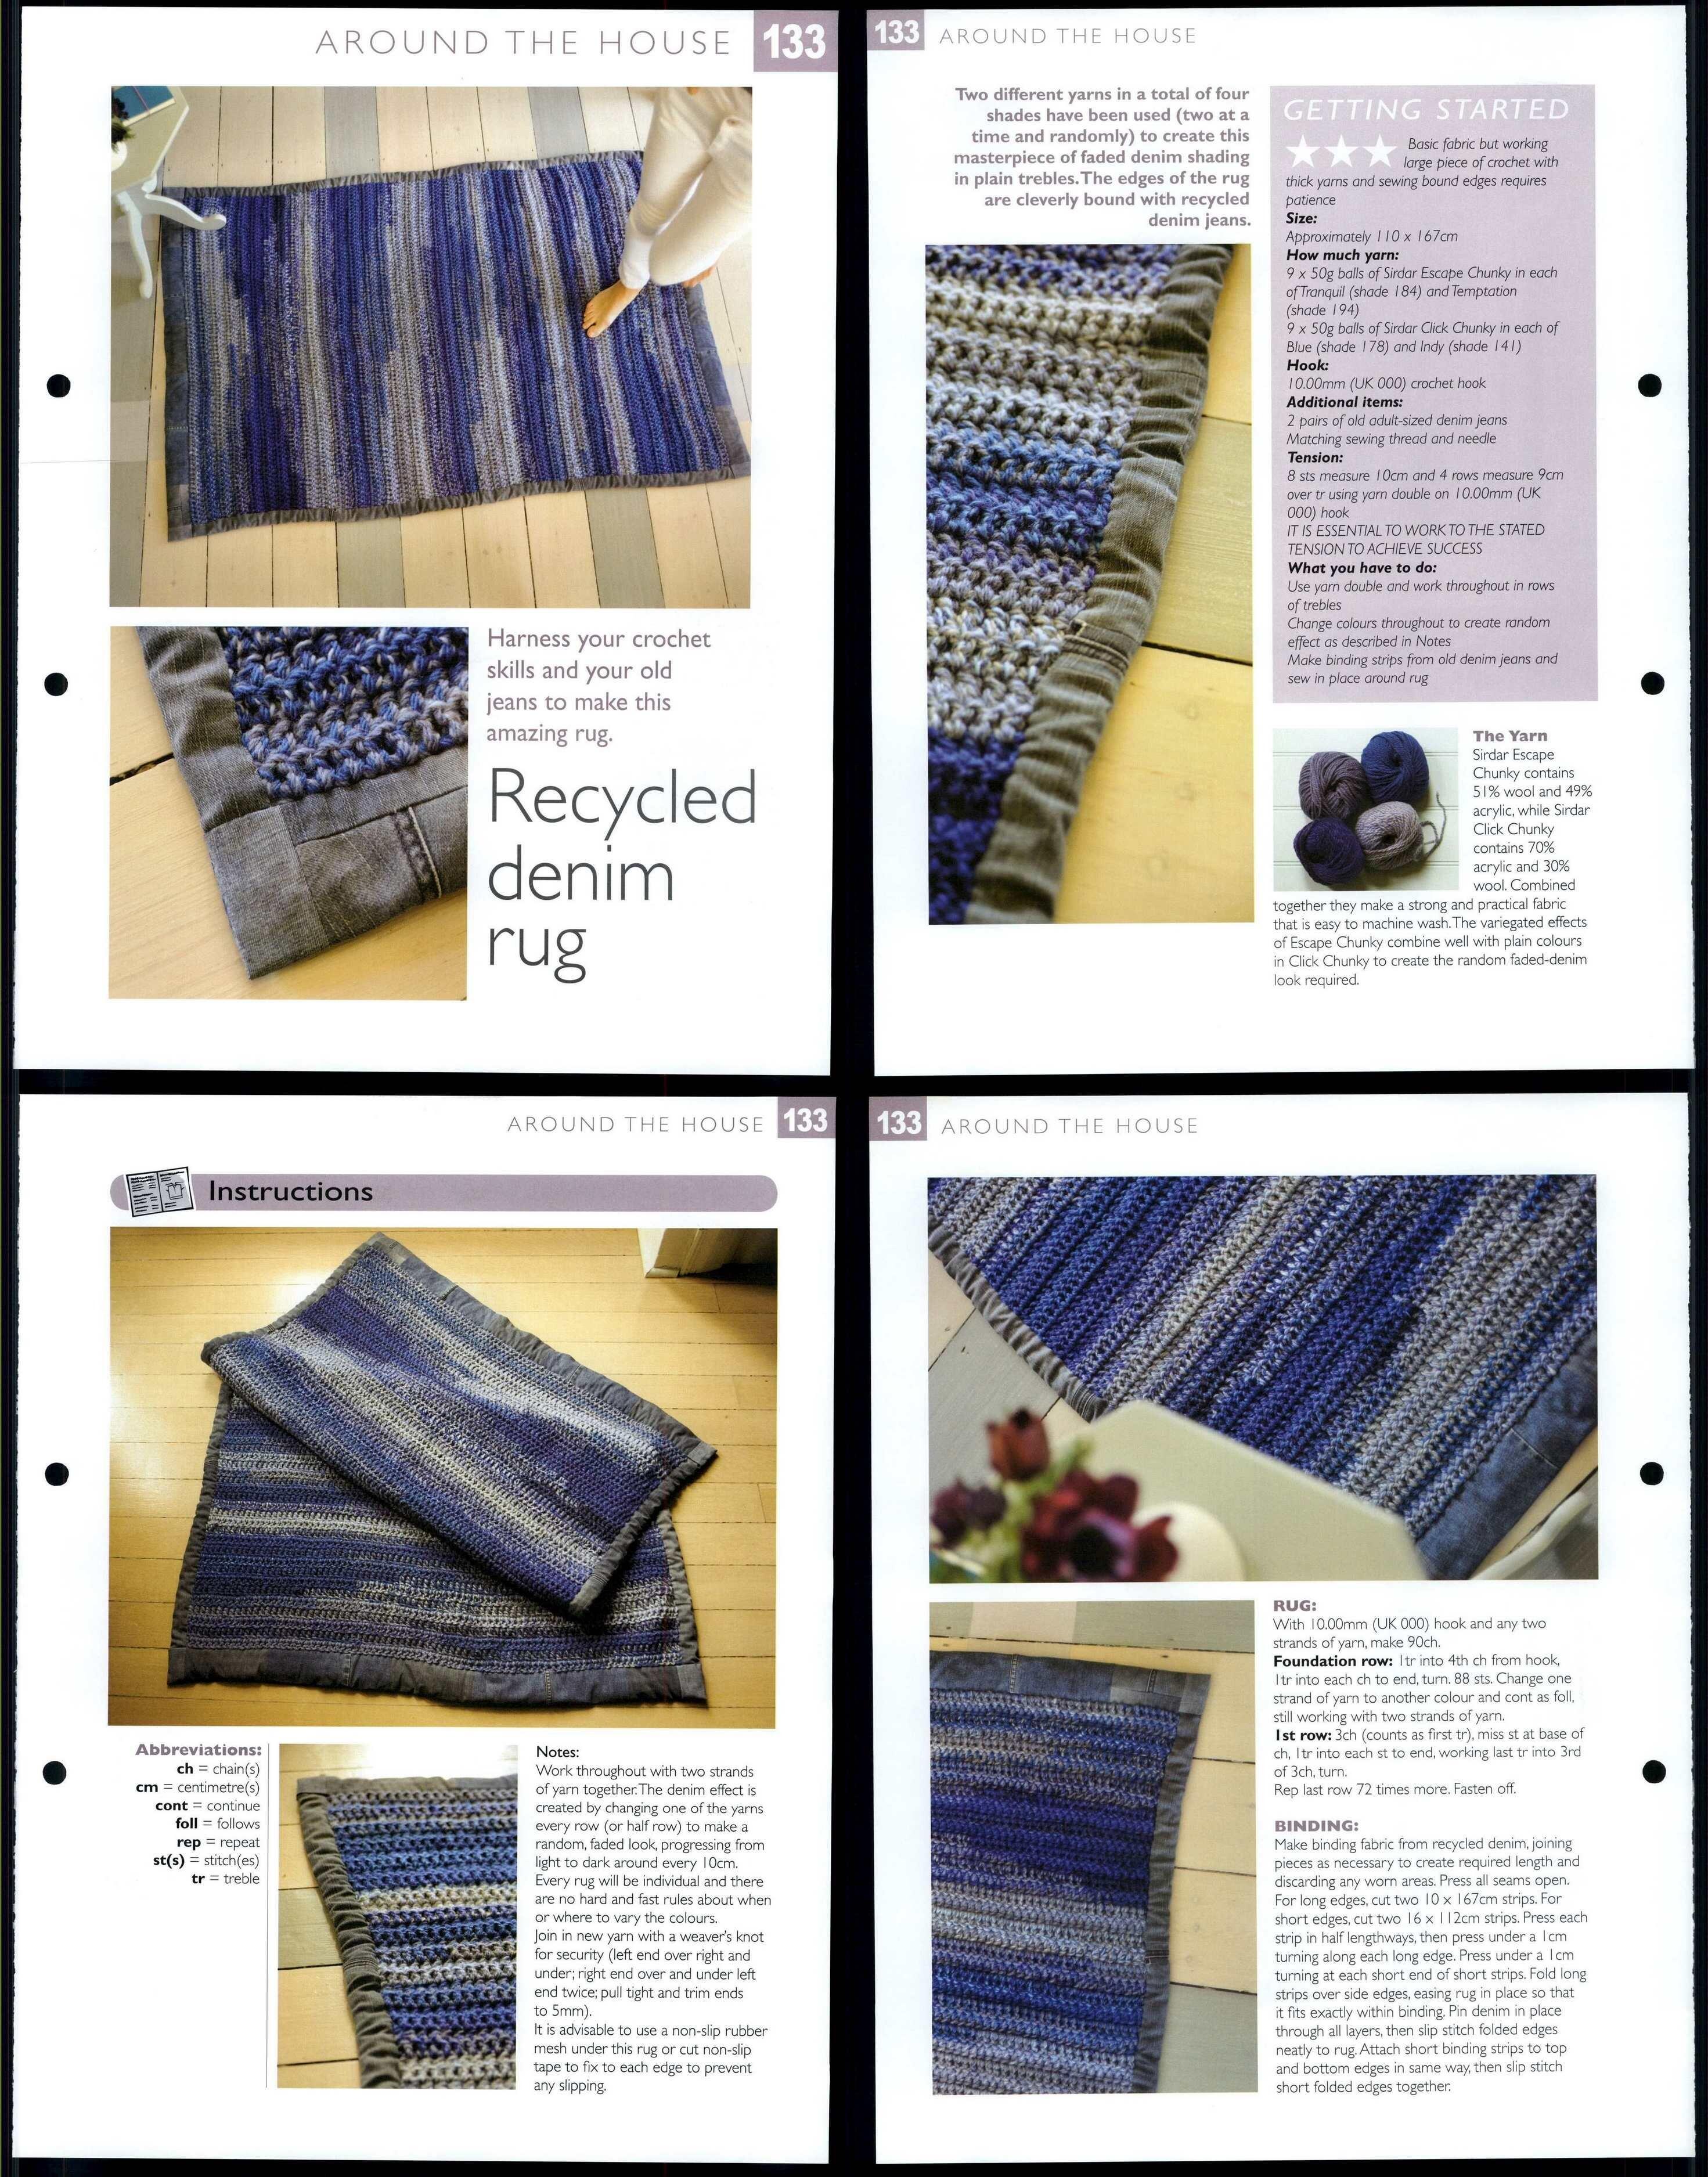 How to Make a Woven Throw Rug out of Recycled Denim Jeans - FeltMagnet